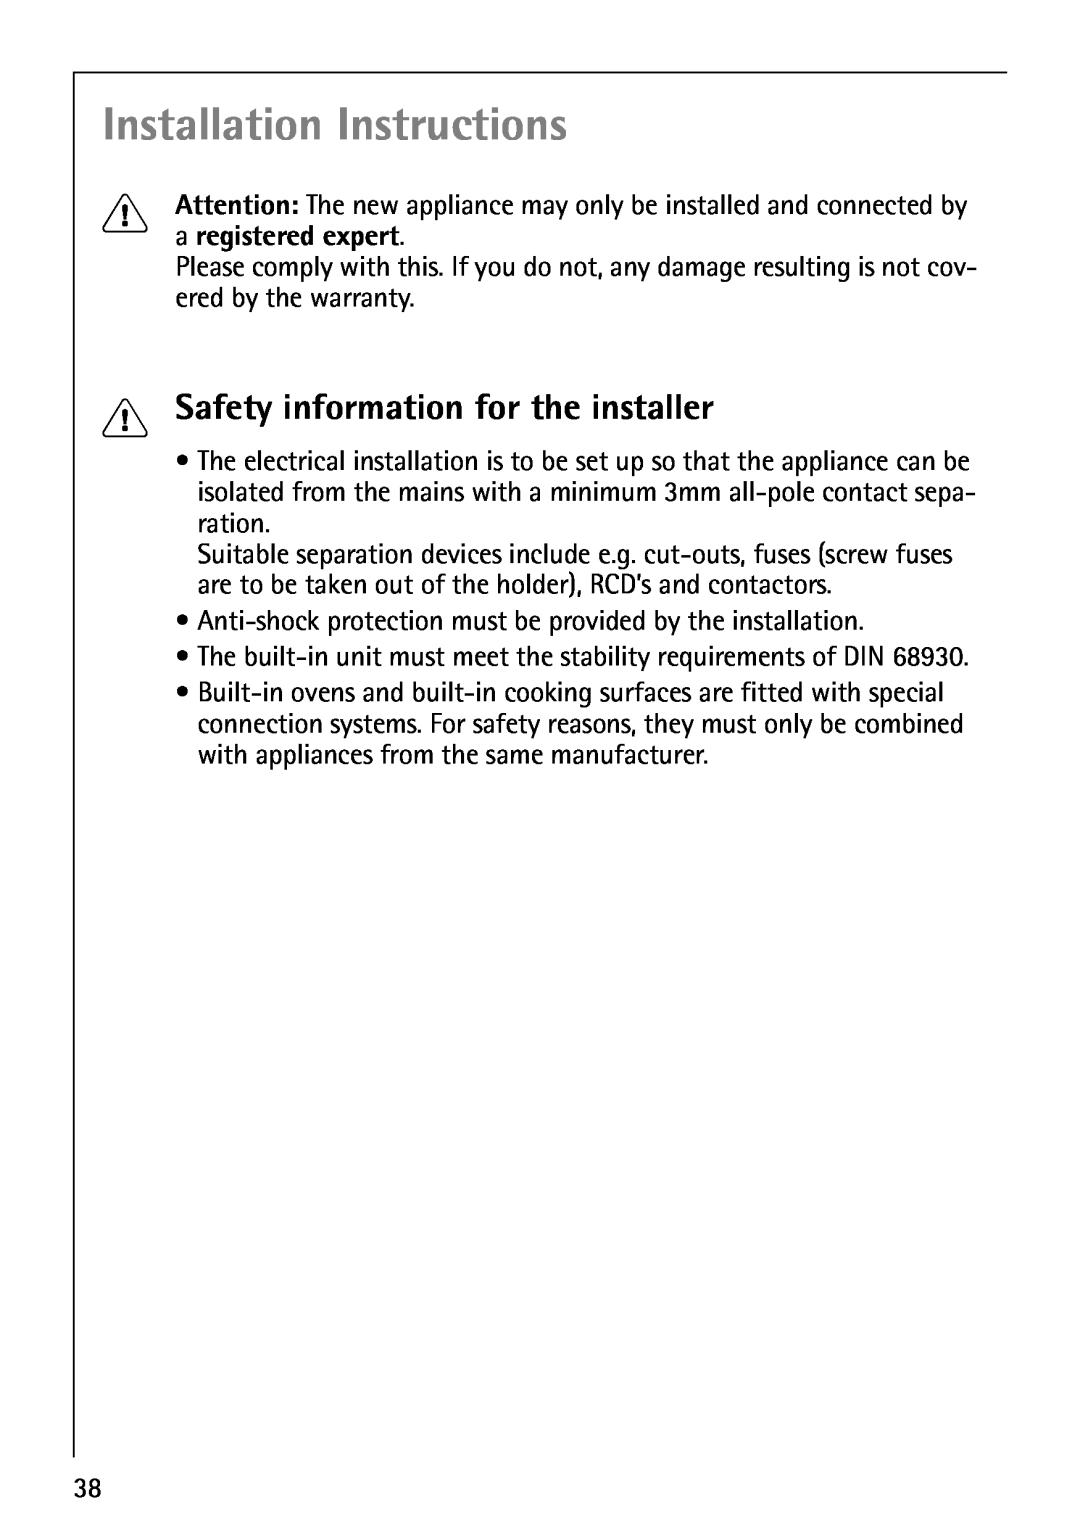 AEG B1180-4 manual Installation Instructions, Safety information for the installer, a registered expert 